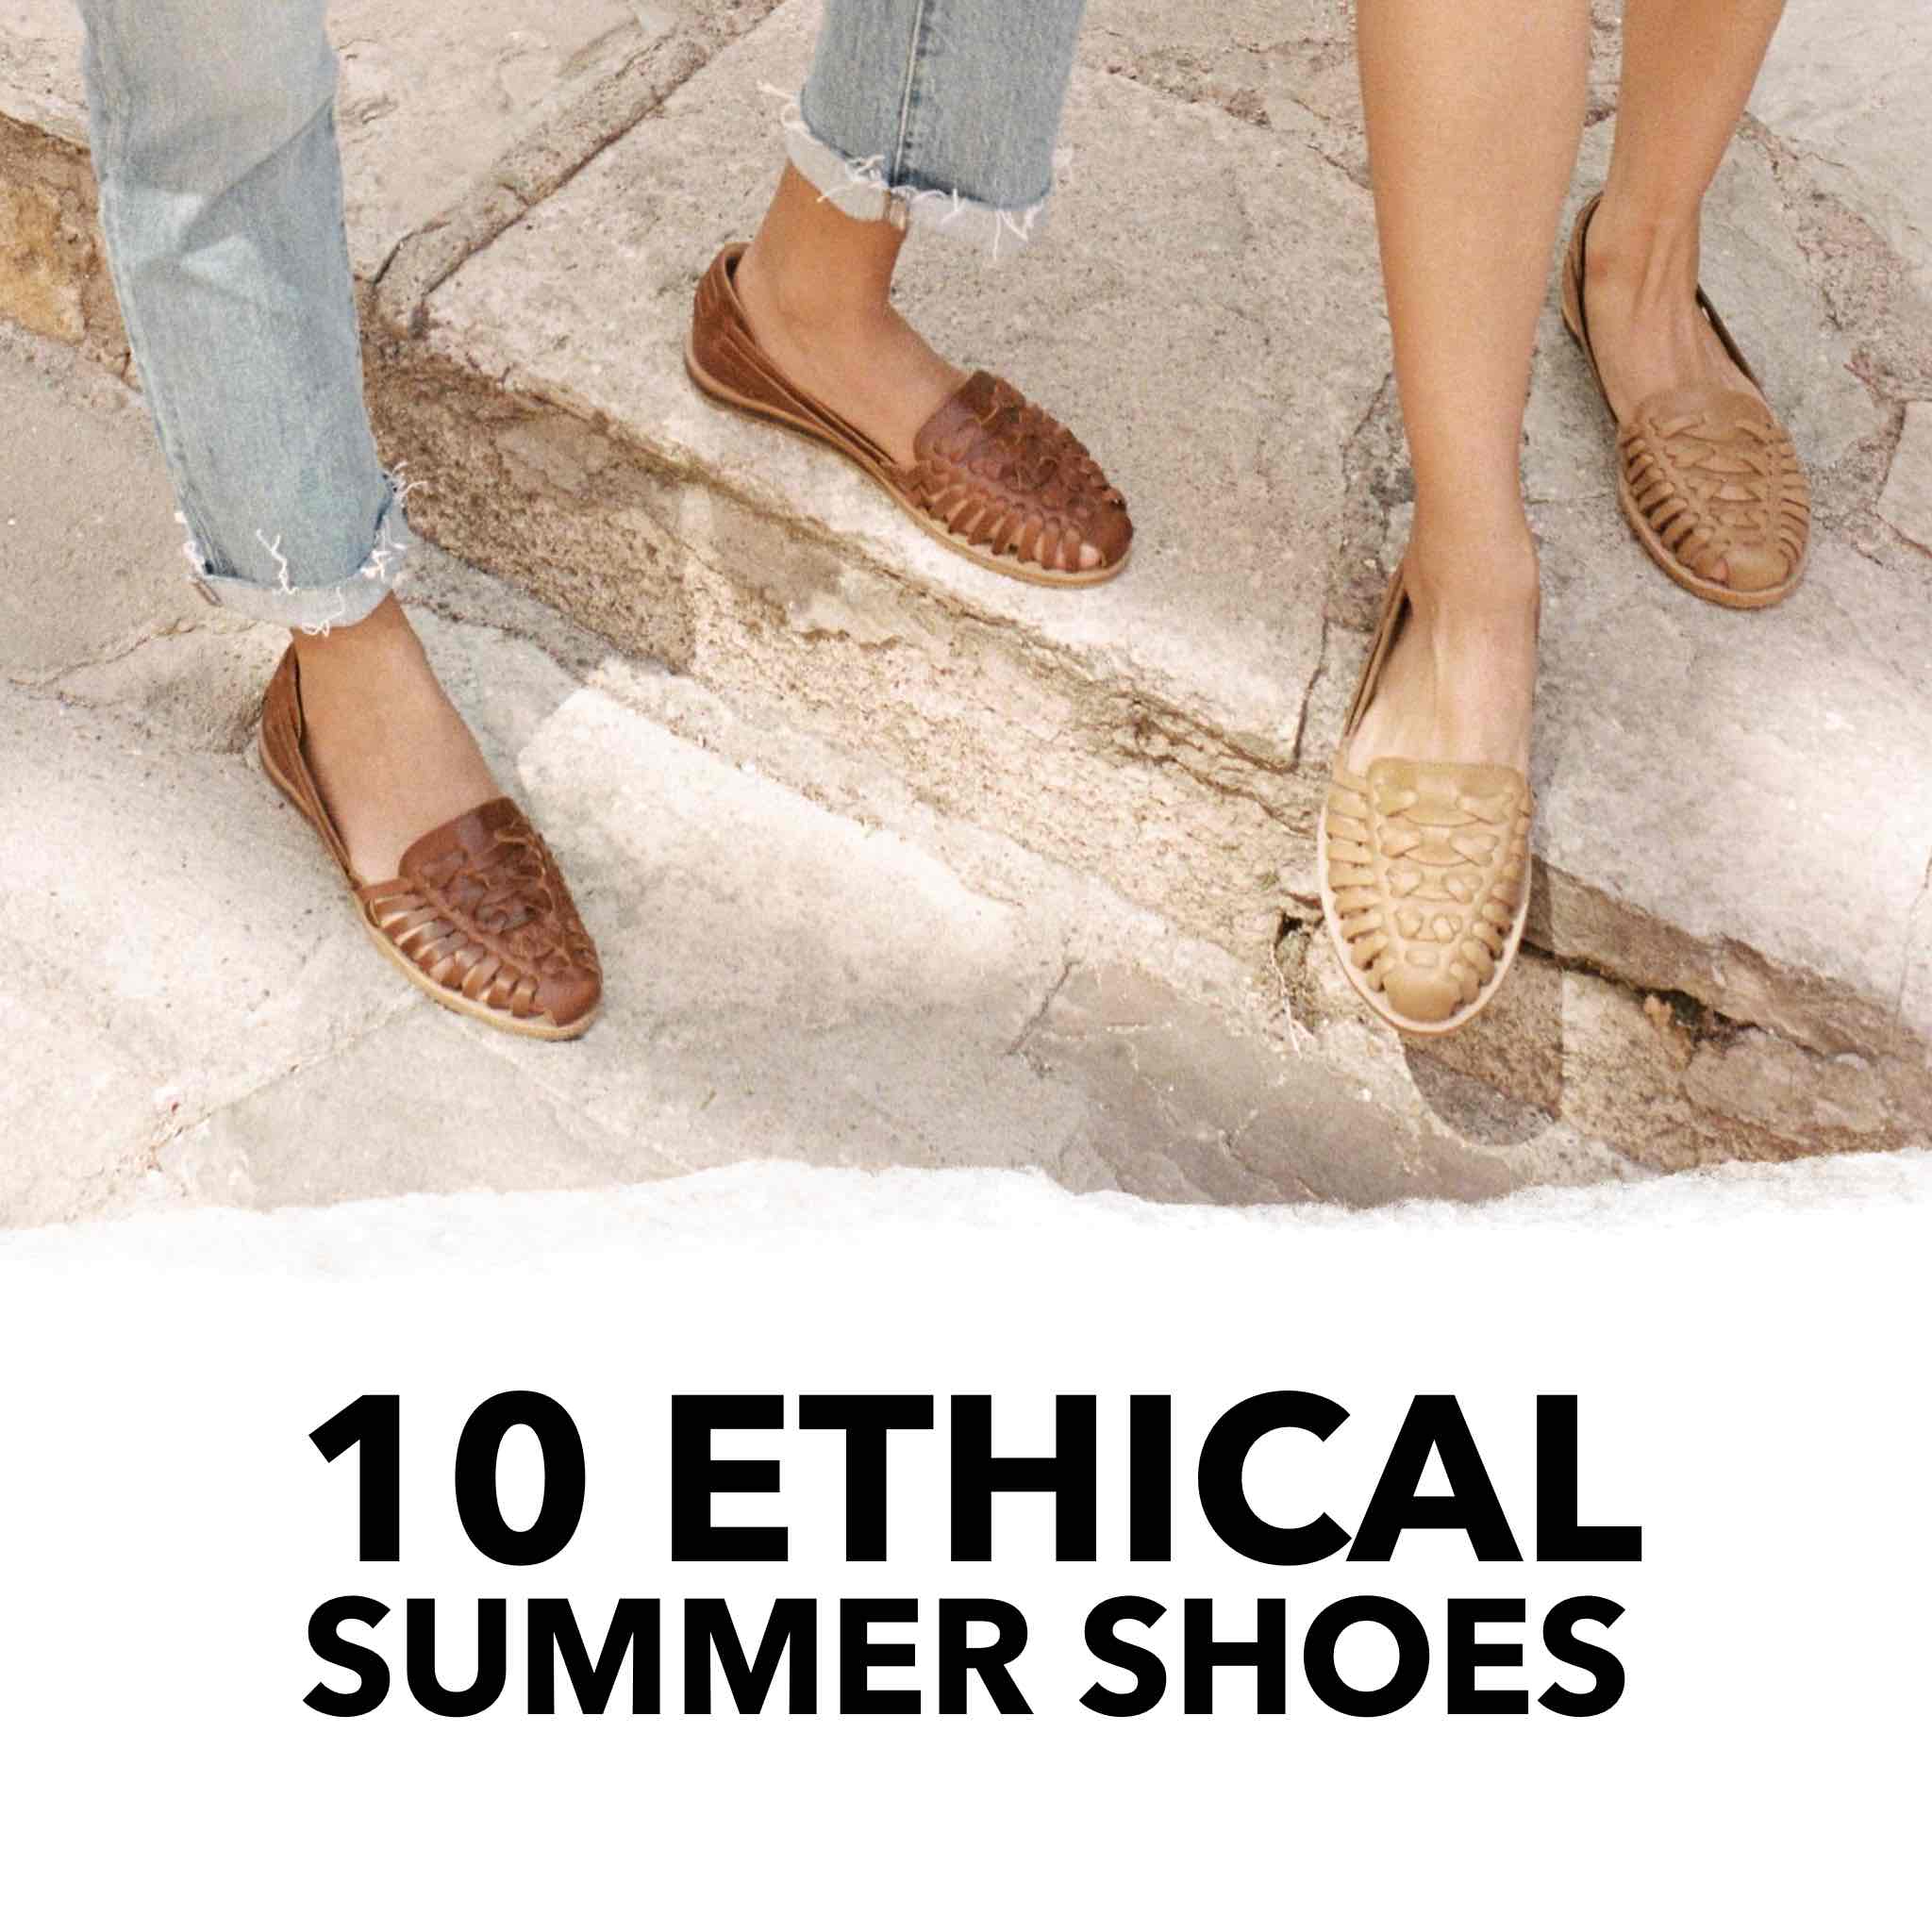 10 ethical summer shoes